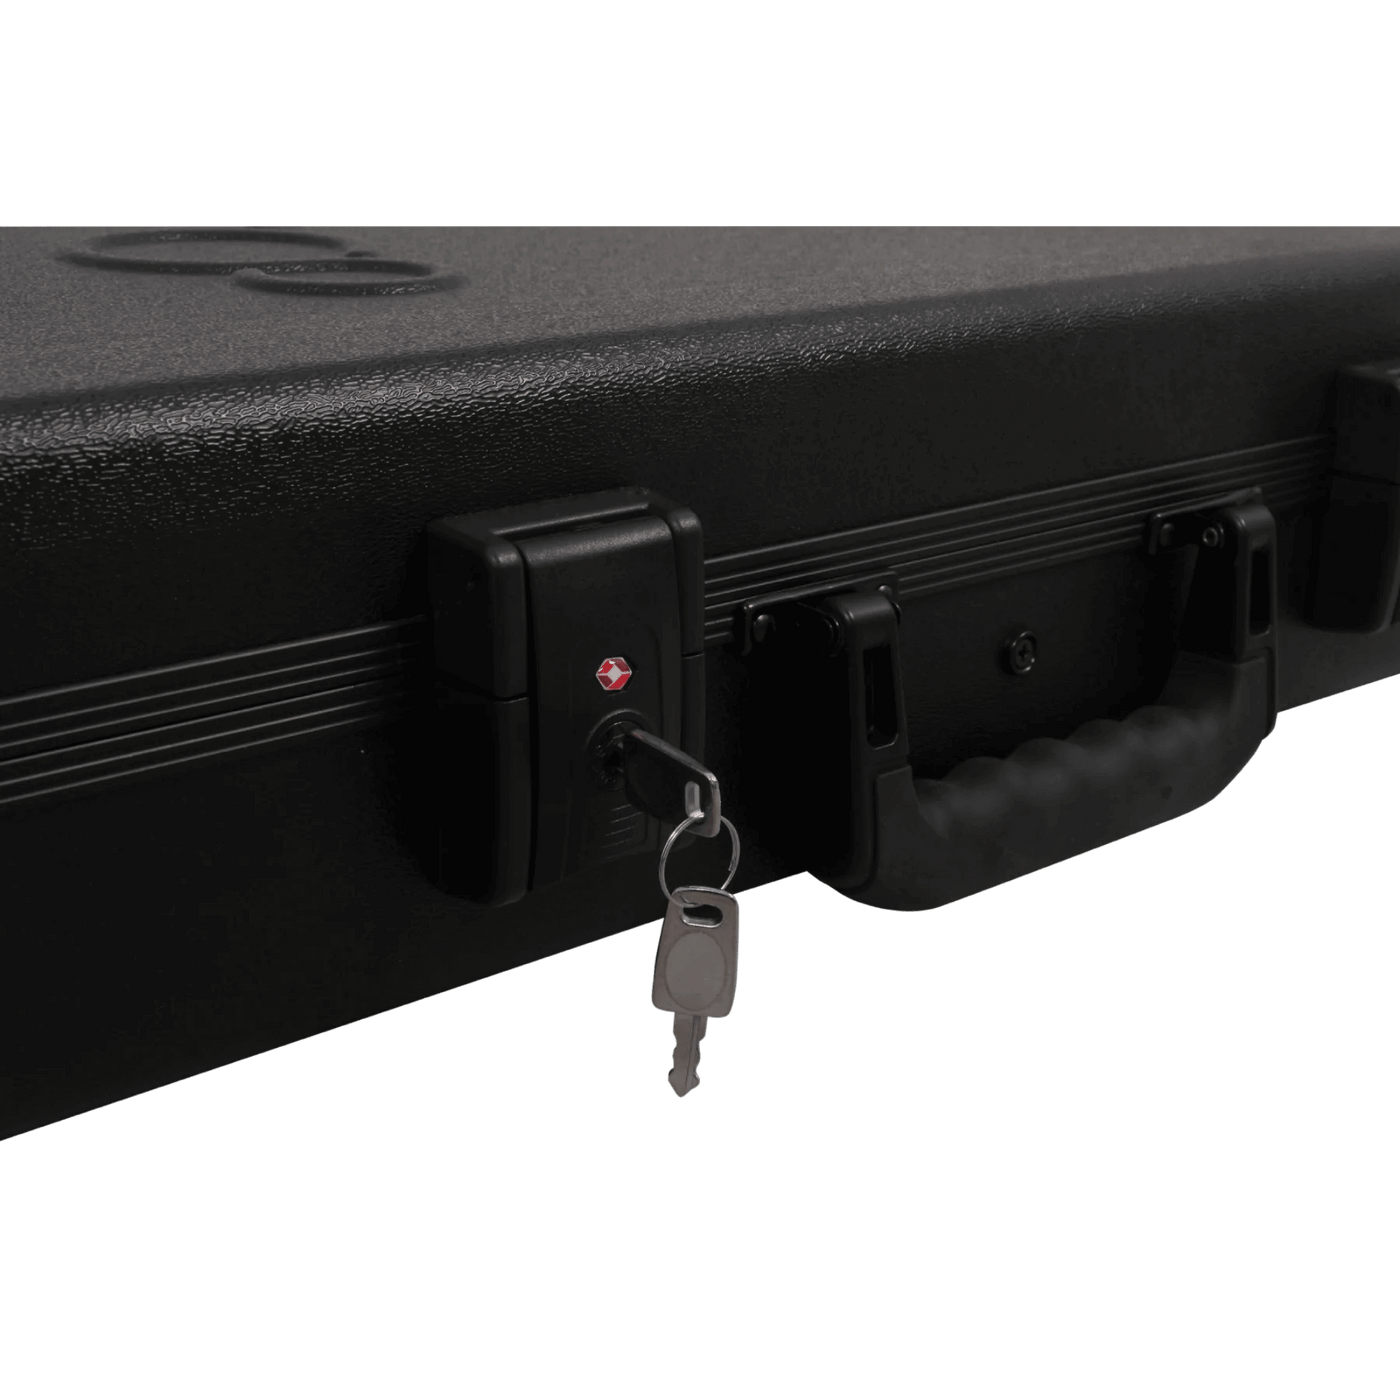 Sire Electric Bass Hardshell Case TSA Latch - Sire's official hard case luggage for guitars. It comes with TSA Lock which allows players to transport their instruments safely and conveniently through a very secure locking system, while permitting security